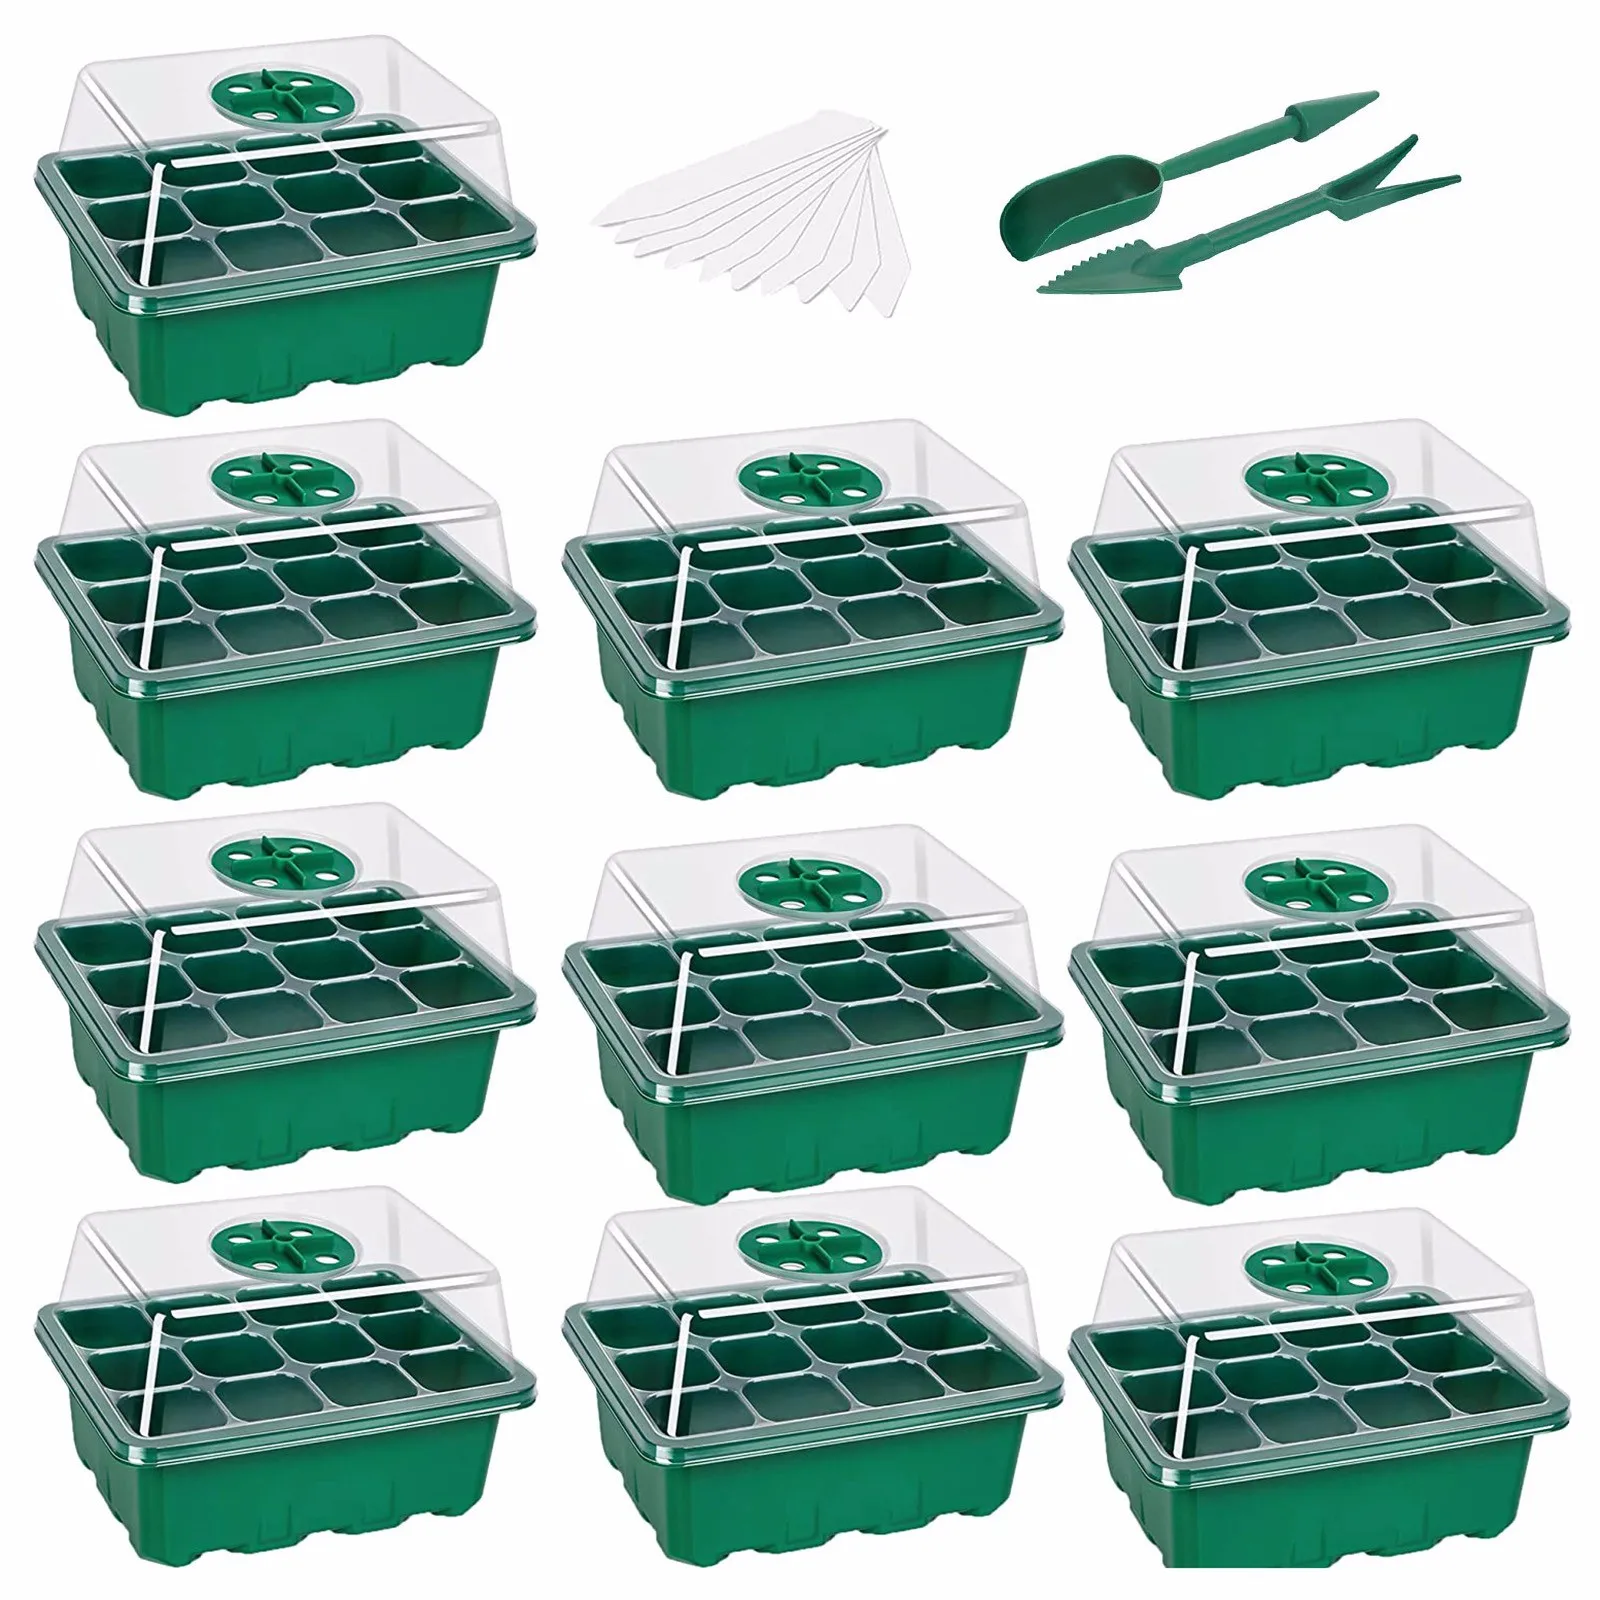 

40# 10-pack Seed Starter Trays Nursery Pots Seedling Tray Humidity Adjustable Switch Garden Decor Accessories 12 Cells Per Tray